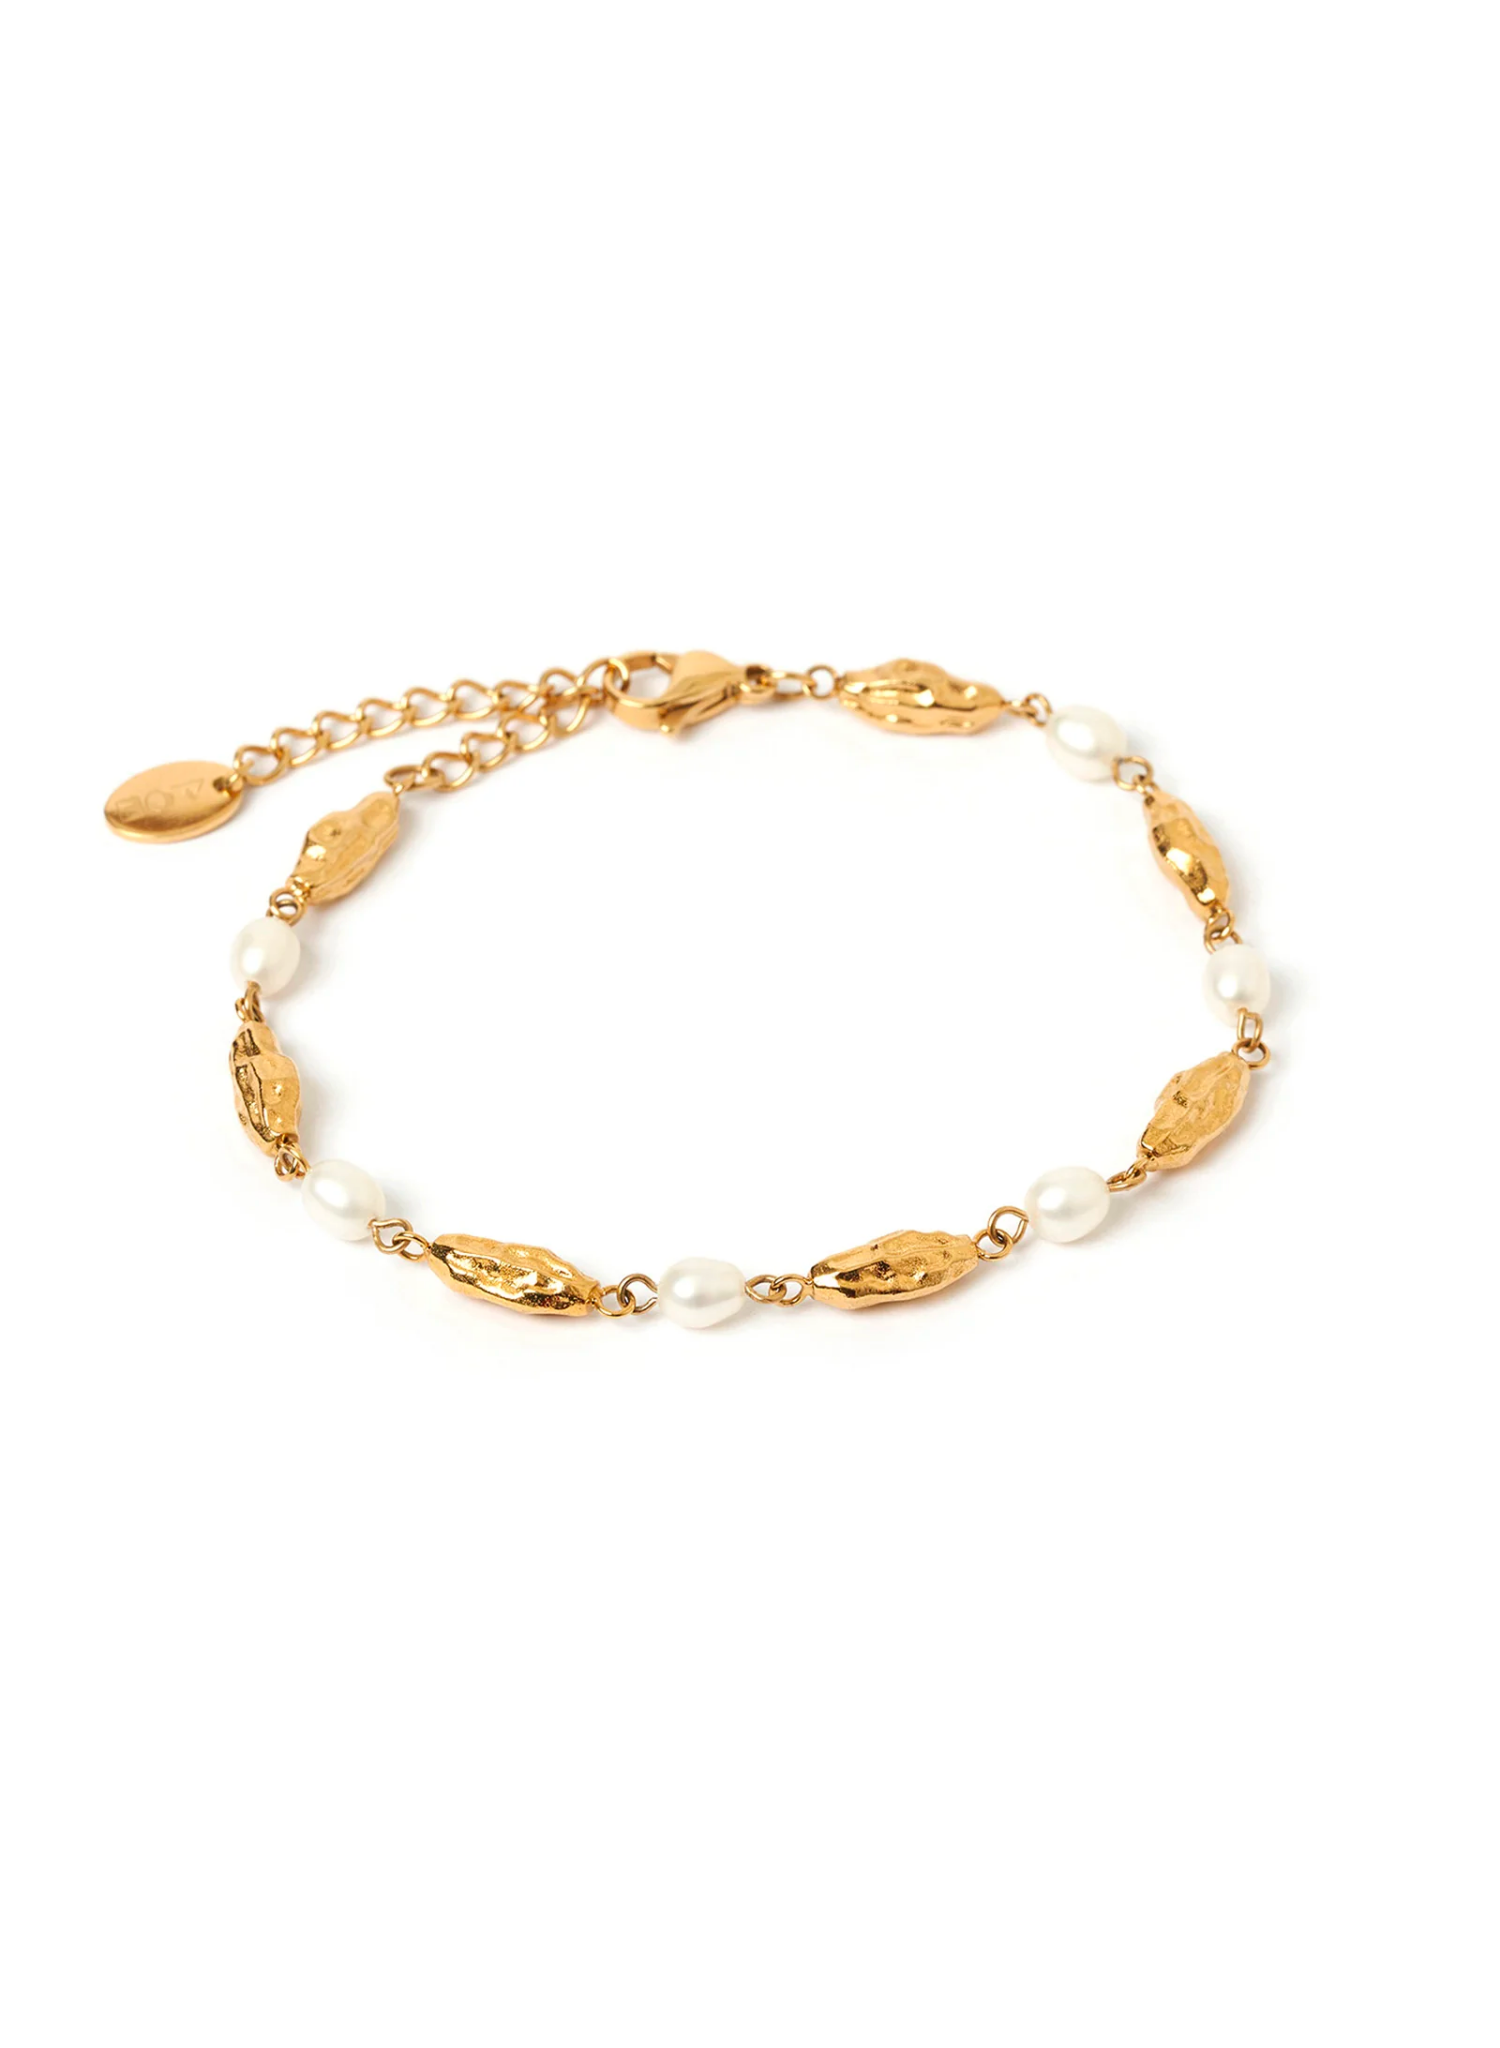 Mimi Pearl and Gold Bracelet